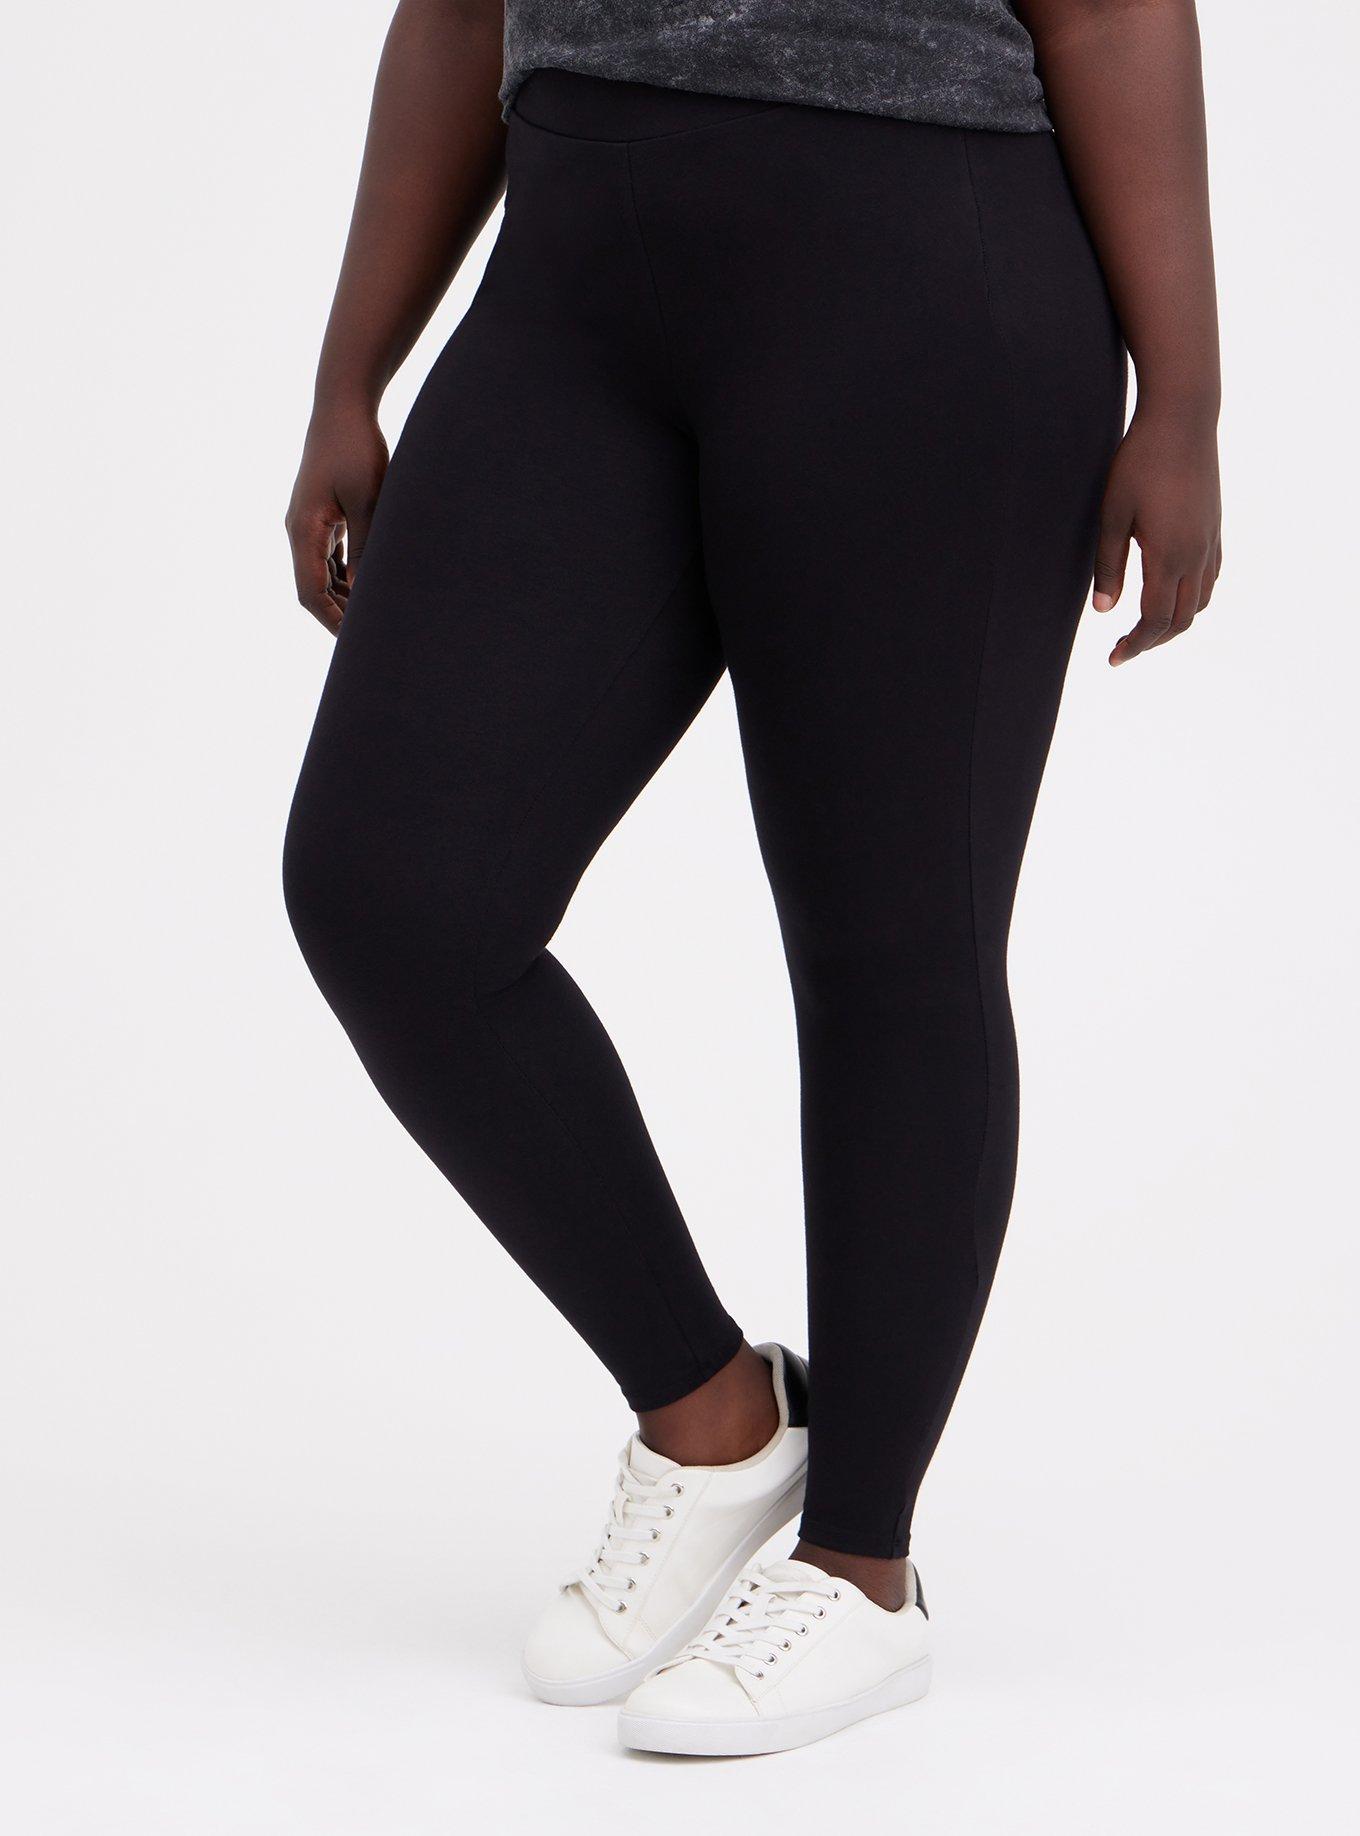 Leggings for Women Plus Size High Waisted Thick XL Nepal